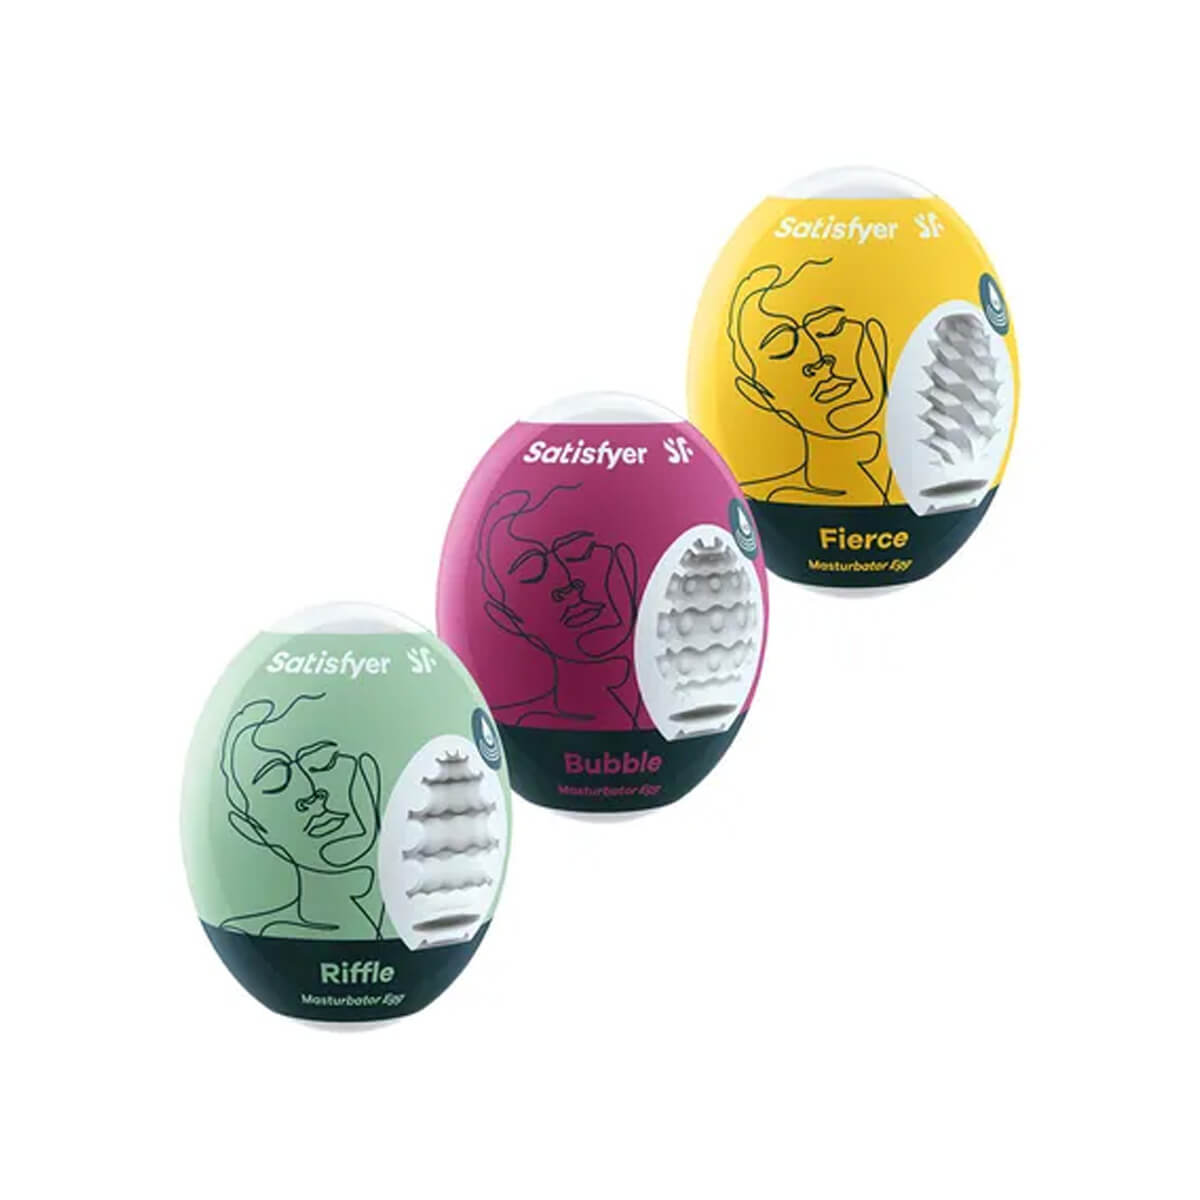 Three egg-shaped containers with soft egg-shaped masturbation sleeves Nudie Co